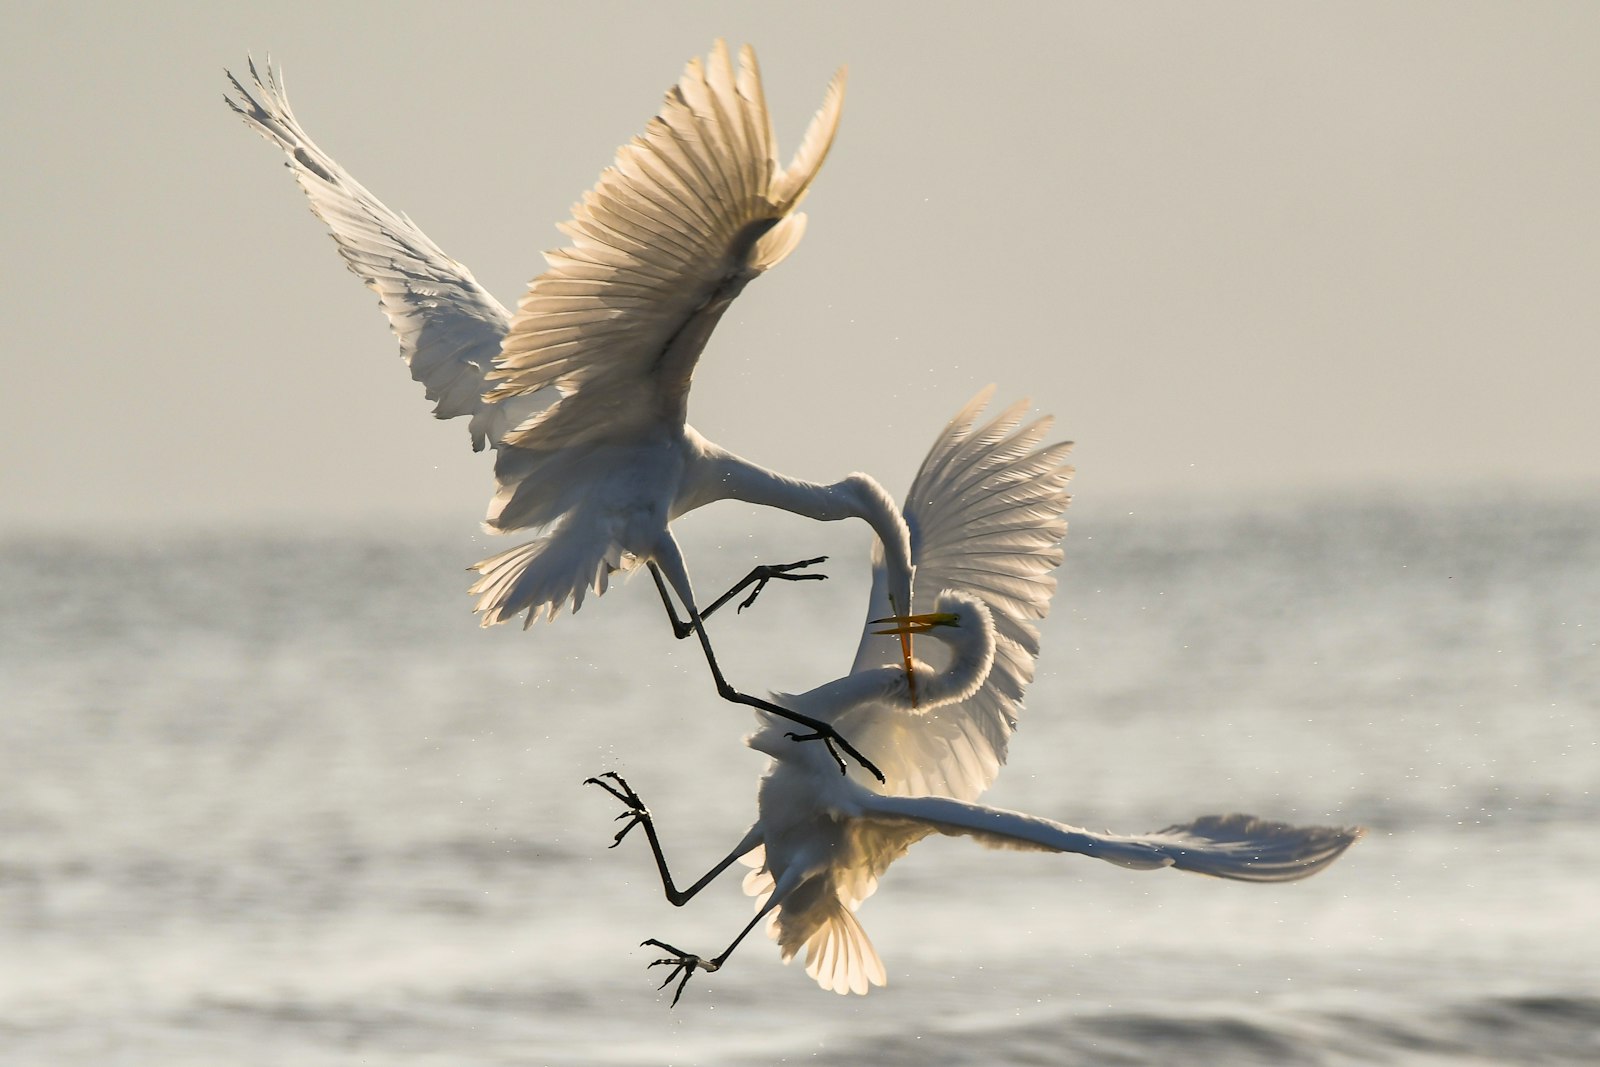 Nikon D500 + Sigma 150-600mm F5-6.3 DG OS HSM | C sample photo. Two crane fighting while photography